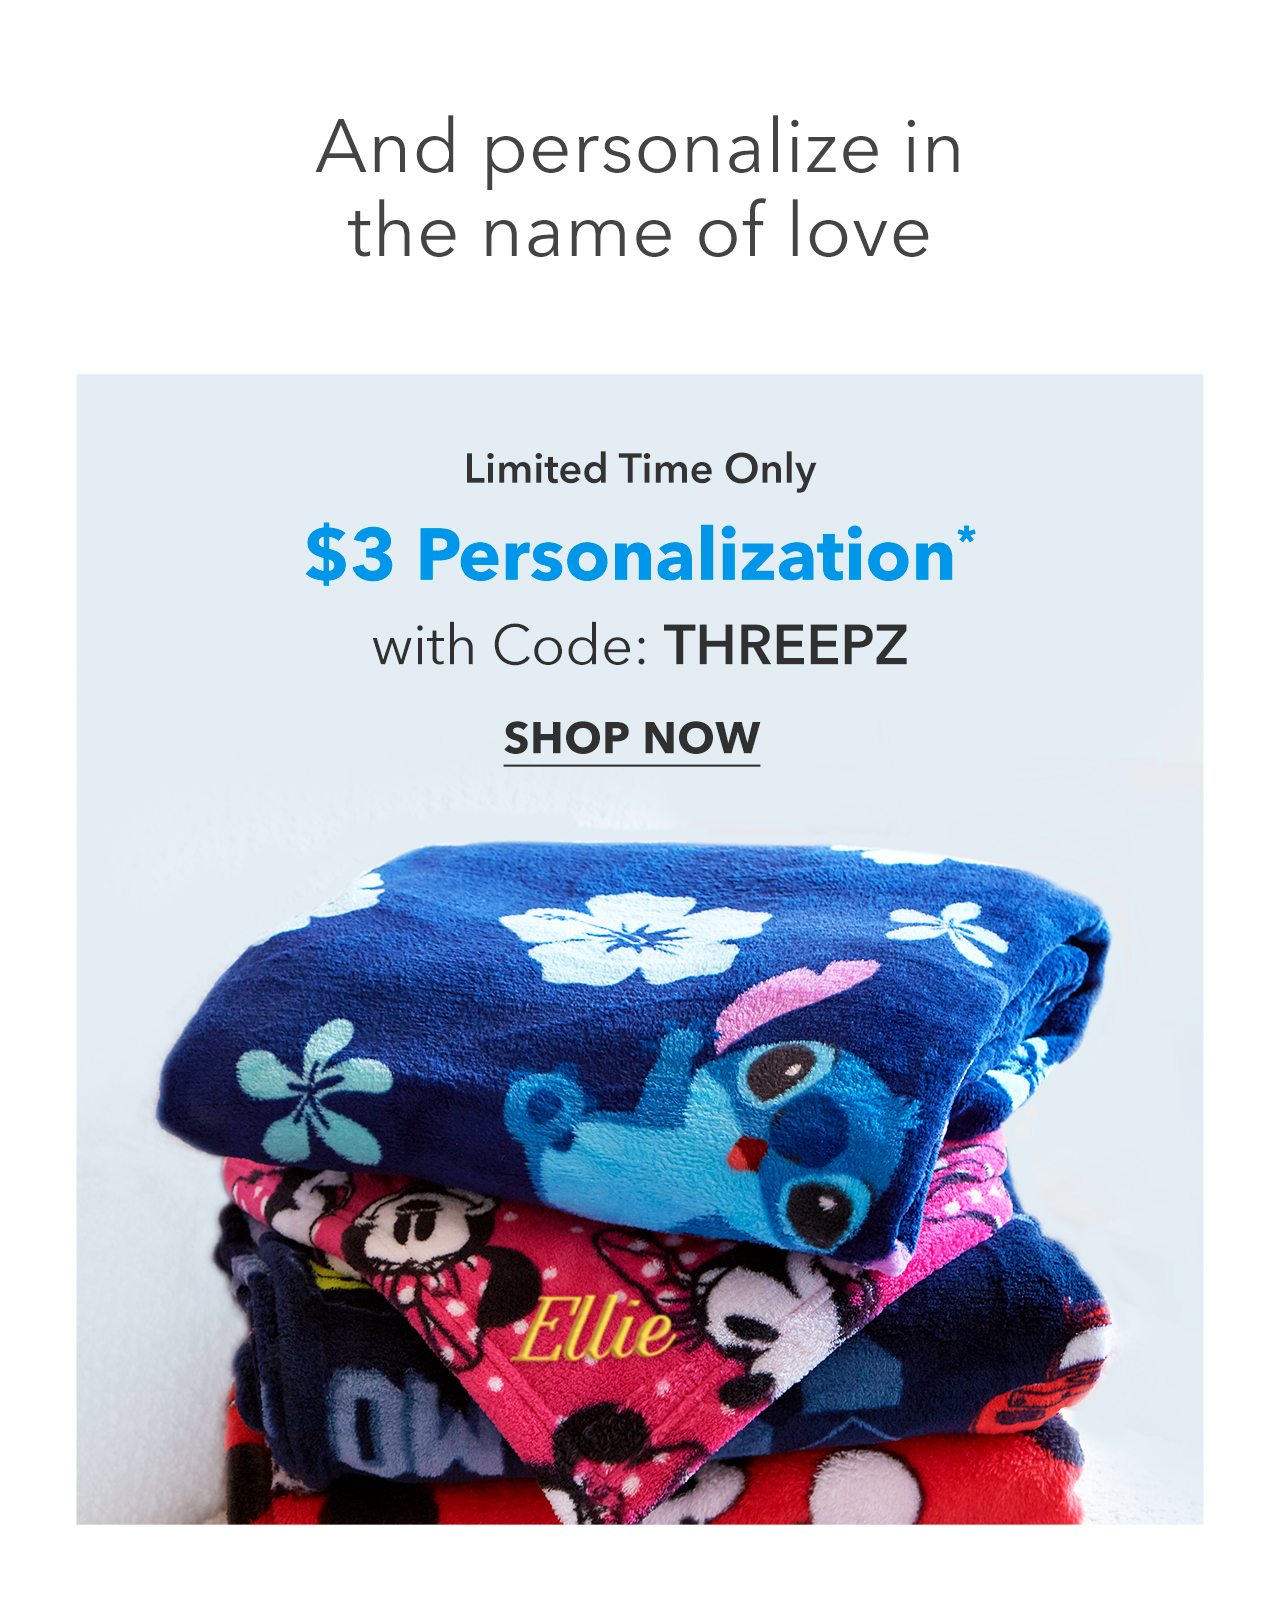 And personalize in the name of love. Limited Time Only, $3 Personalization with Code: THREEPZ | Shop Now